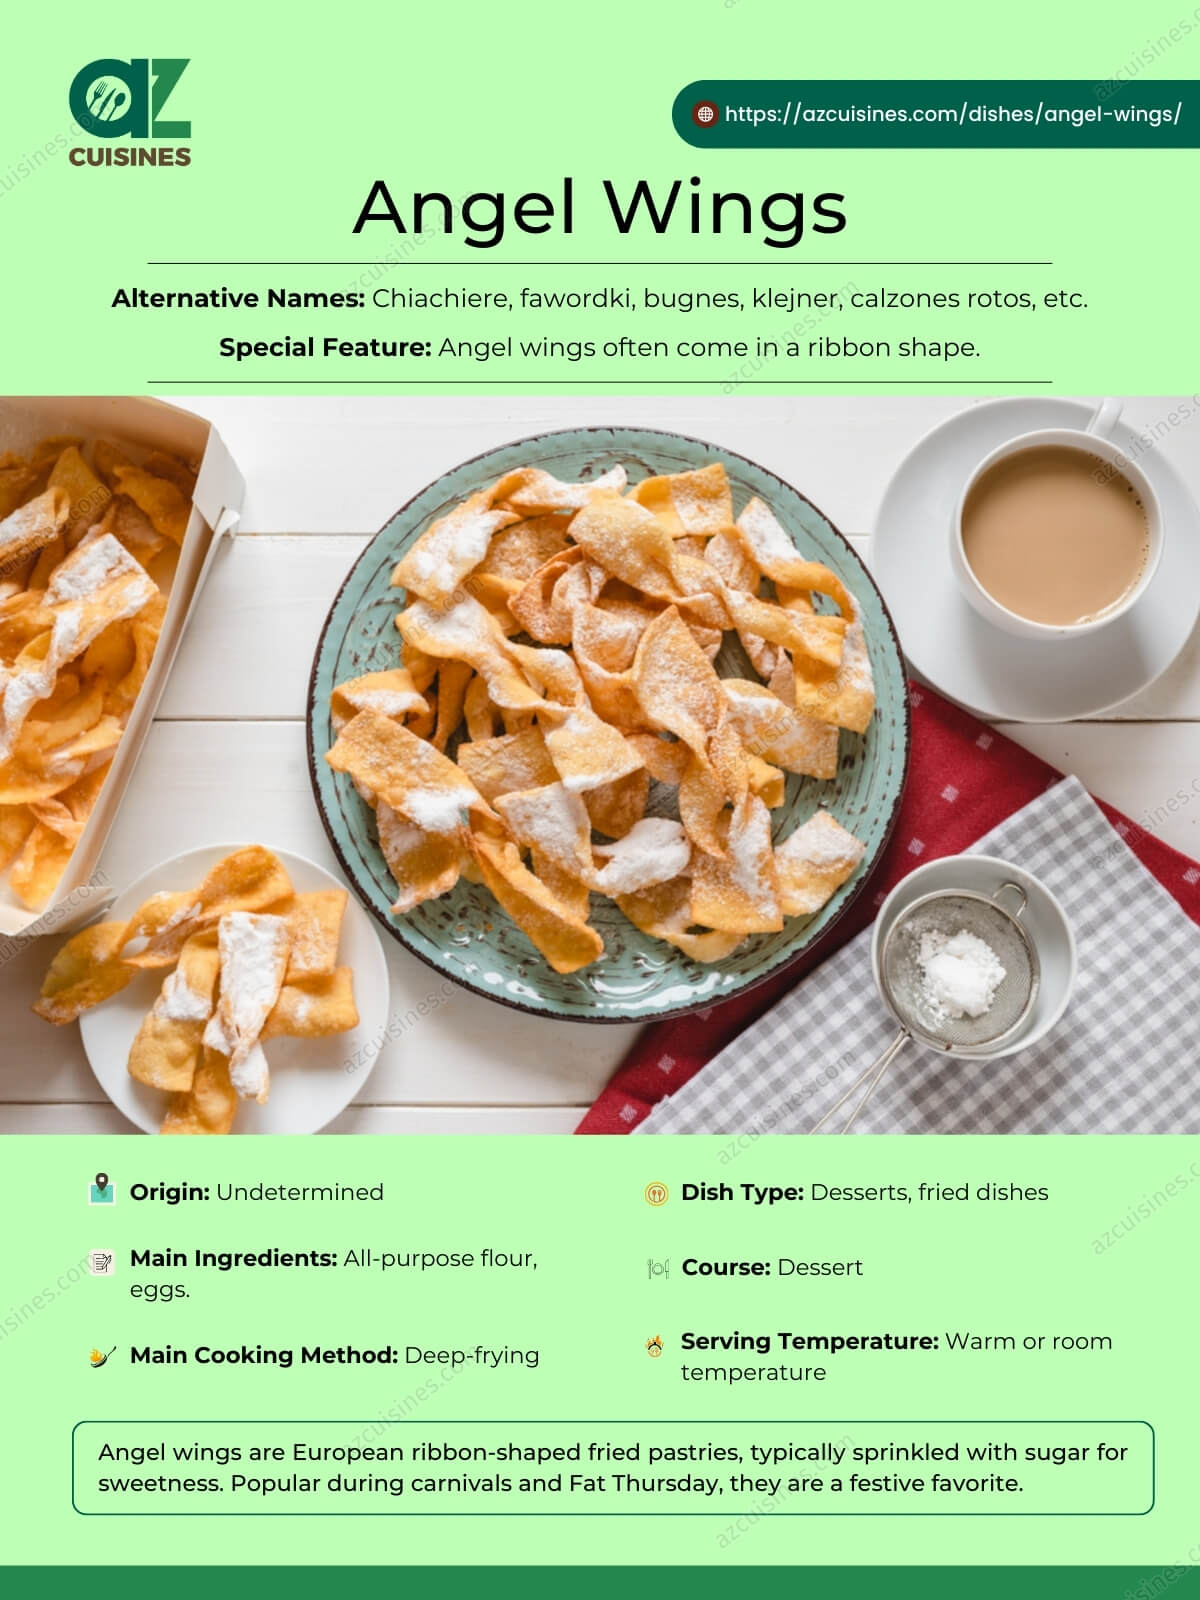 Angel Wings Overview